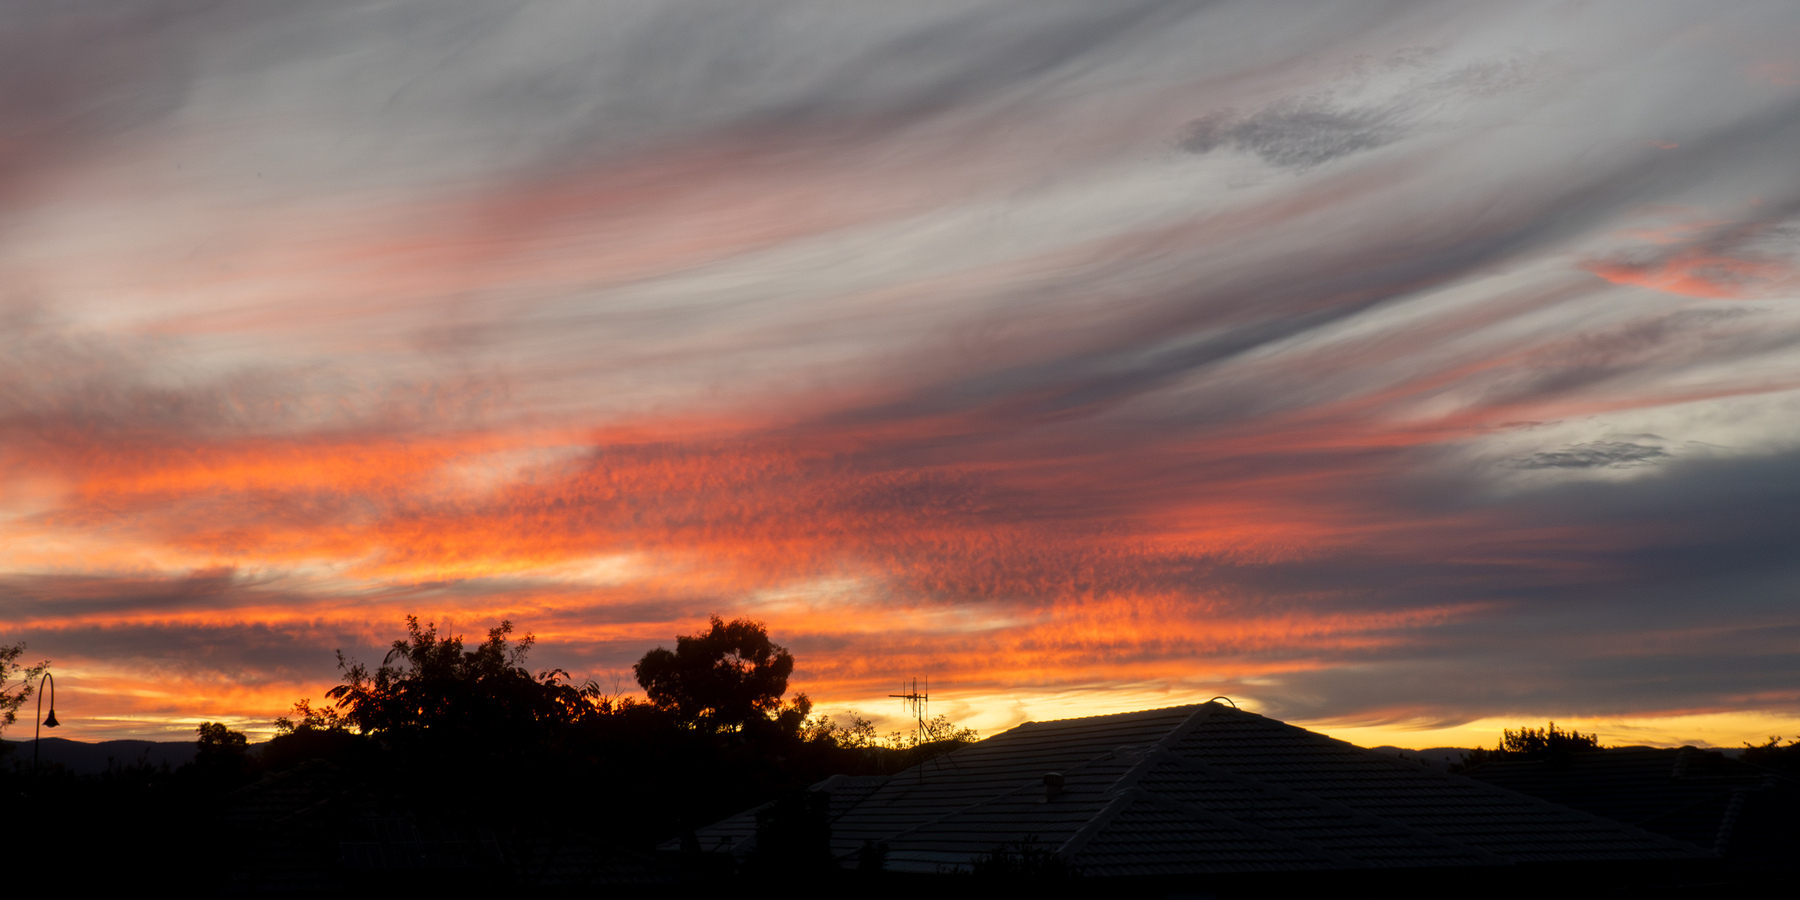 Sunset - silhouette of houses and trees at the bottom - orange and yellow glow with streaky grey clouds.